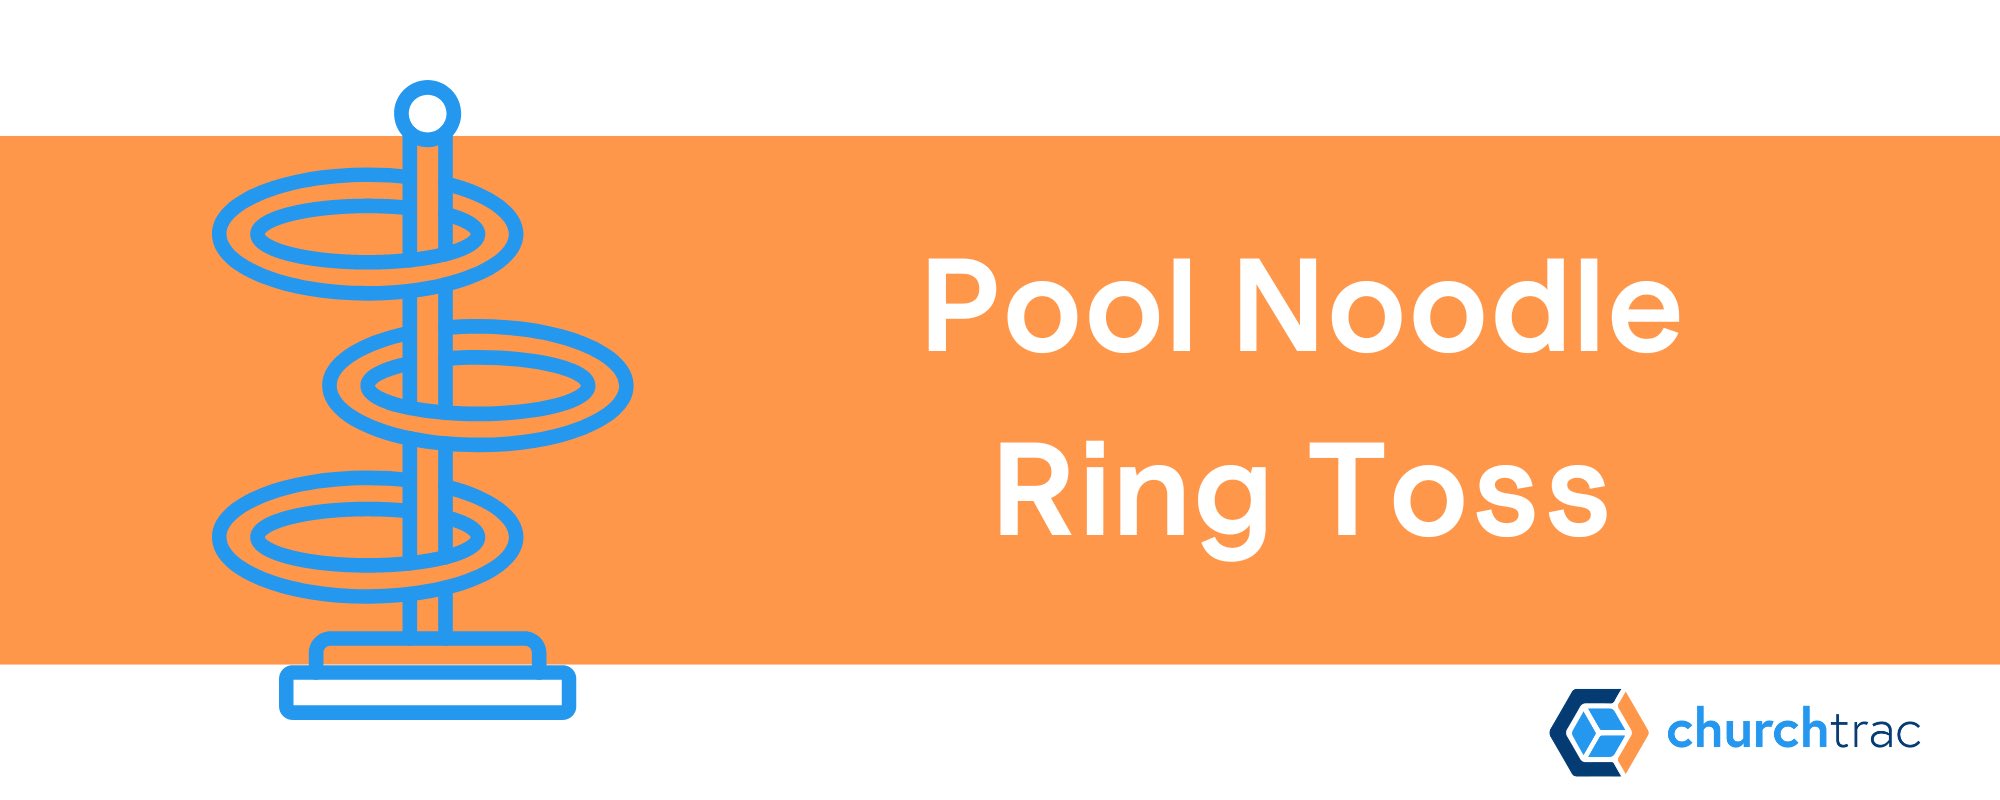 Pool Noodle Ring Toss is a fun VBS Indoor Game Idea